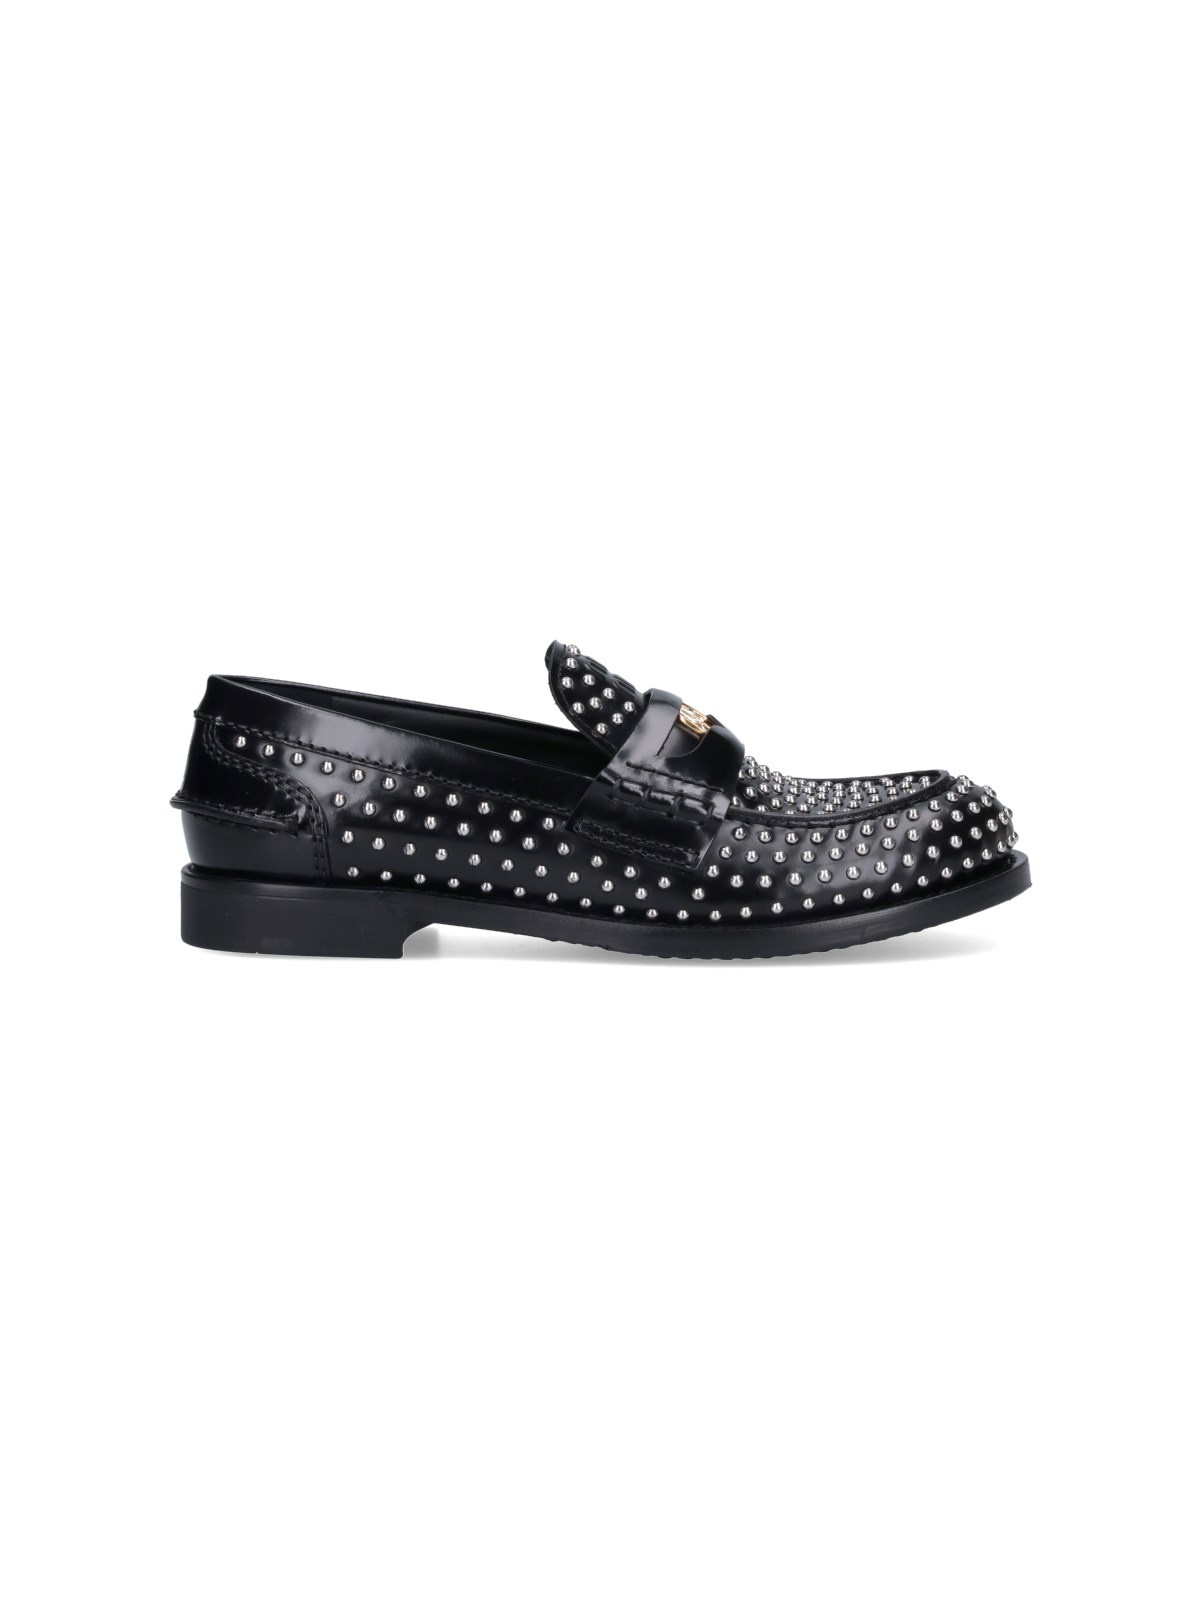 "PENNY LOAFERS" STUDDED LOAFERS - 1